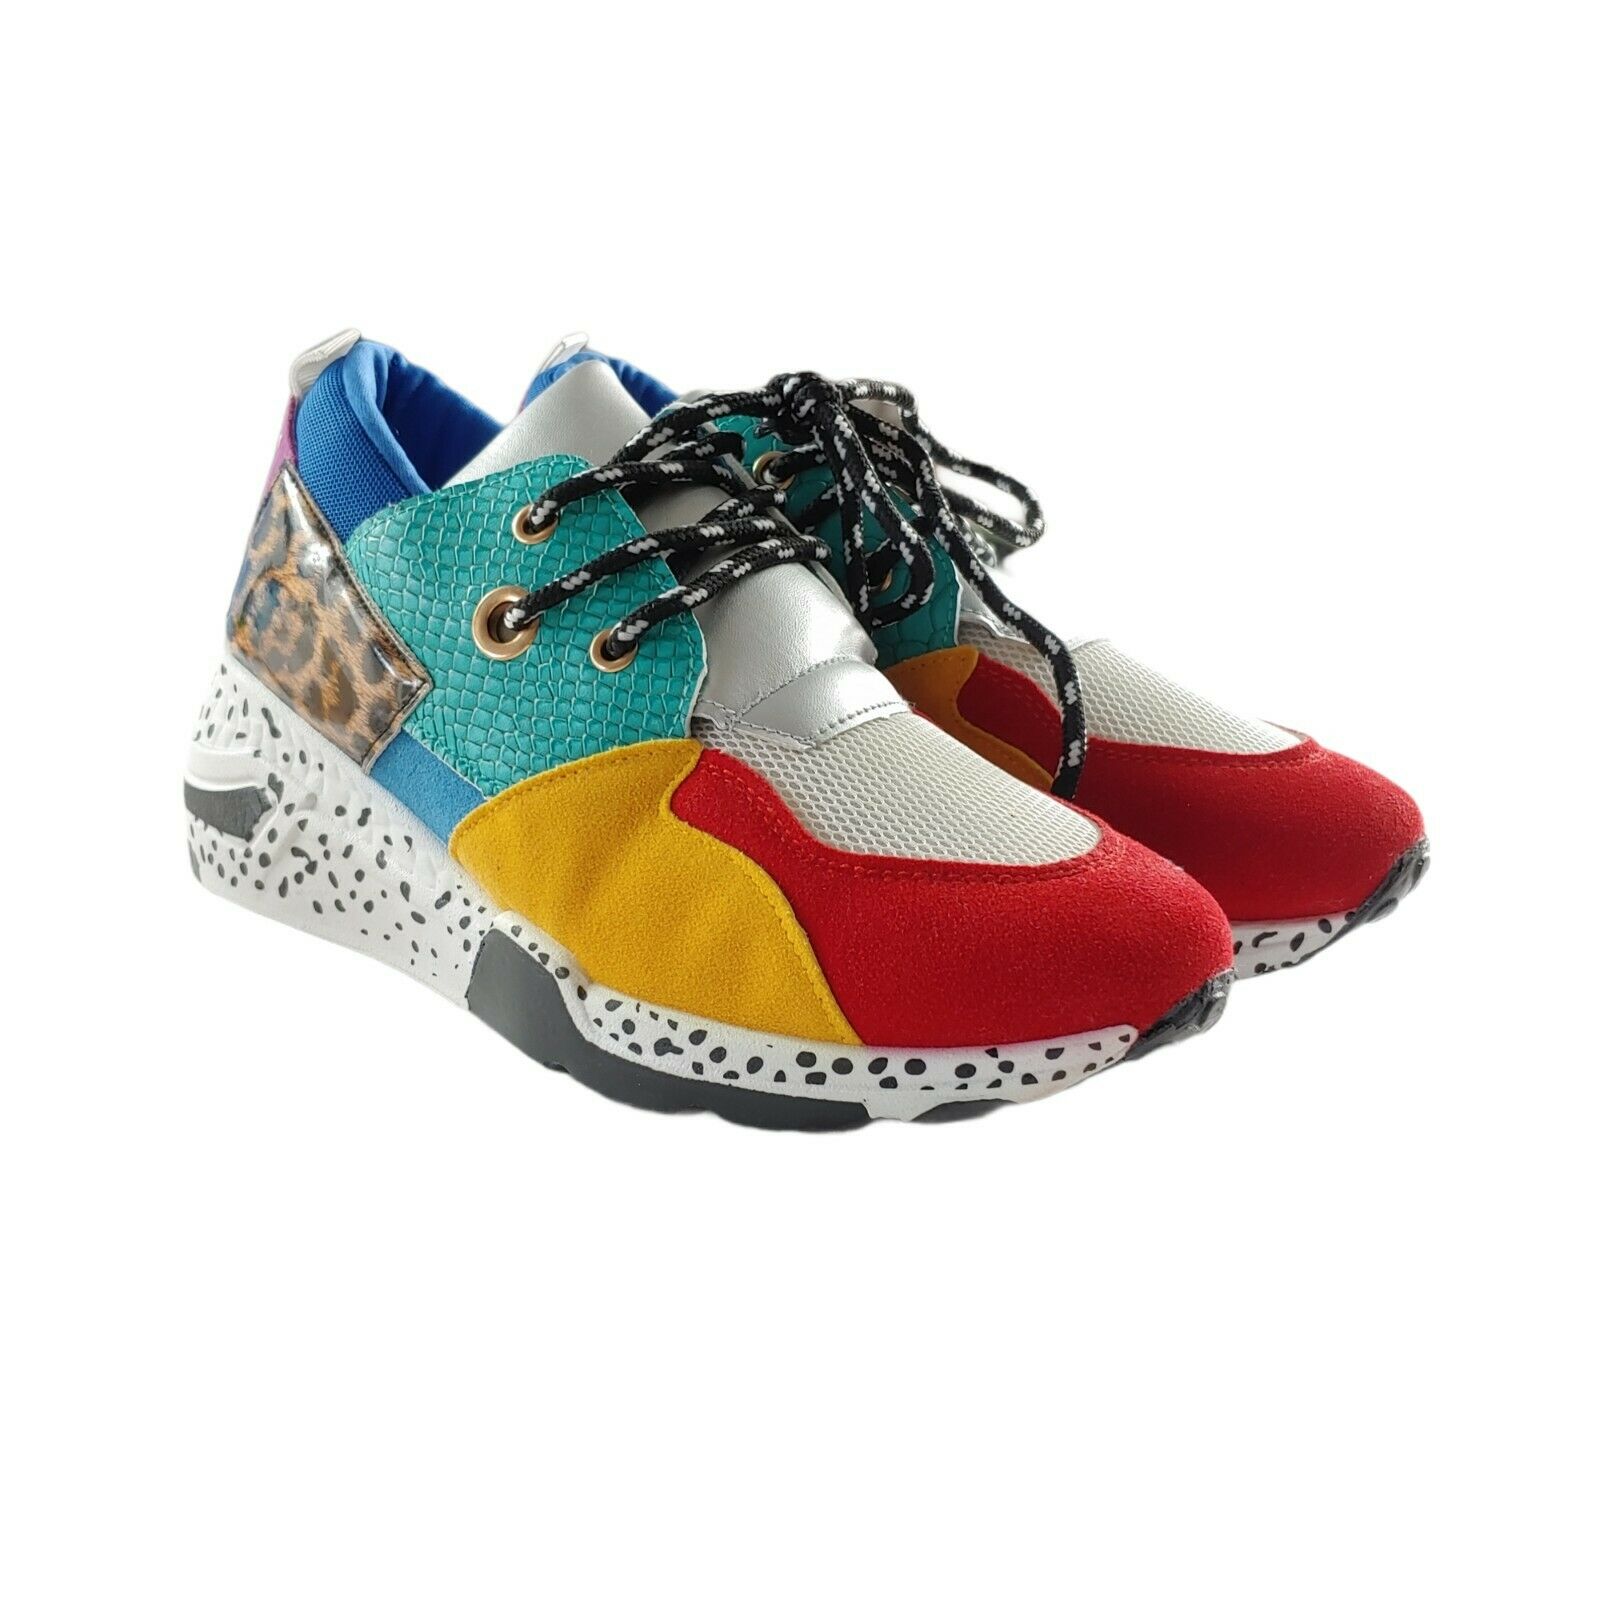 2020 Fashion Women's Height Increasing Sneakers Color Block Multi-pattern Shoes